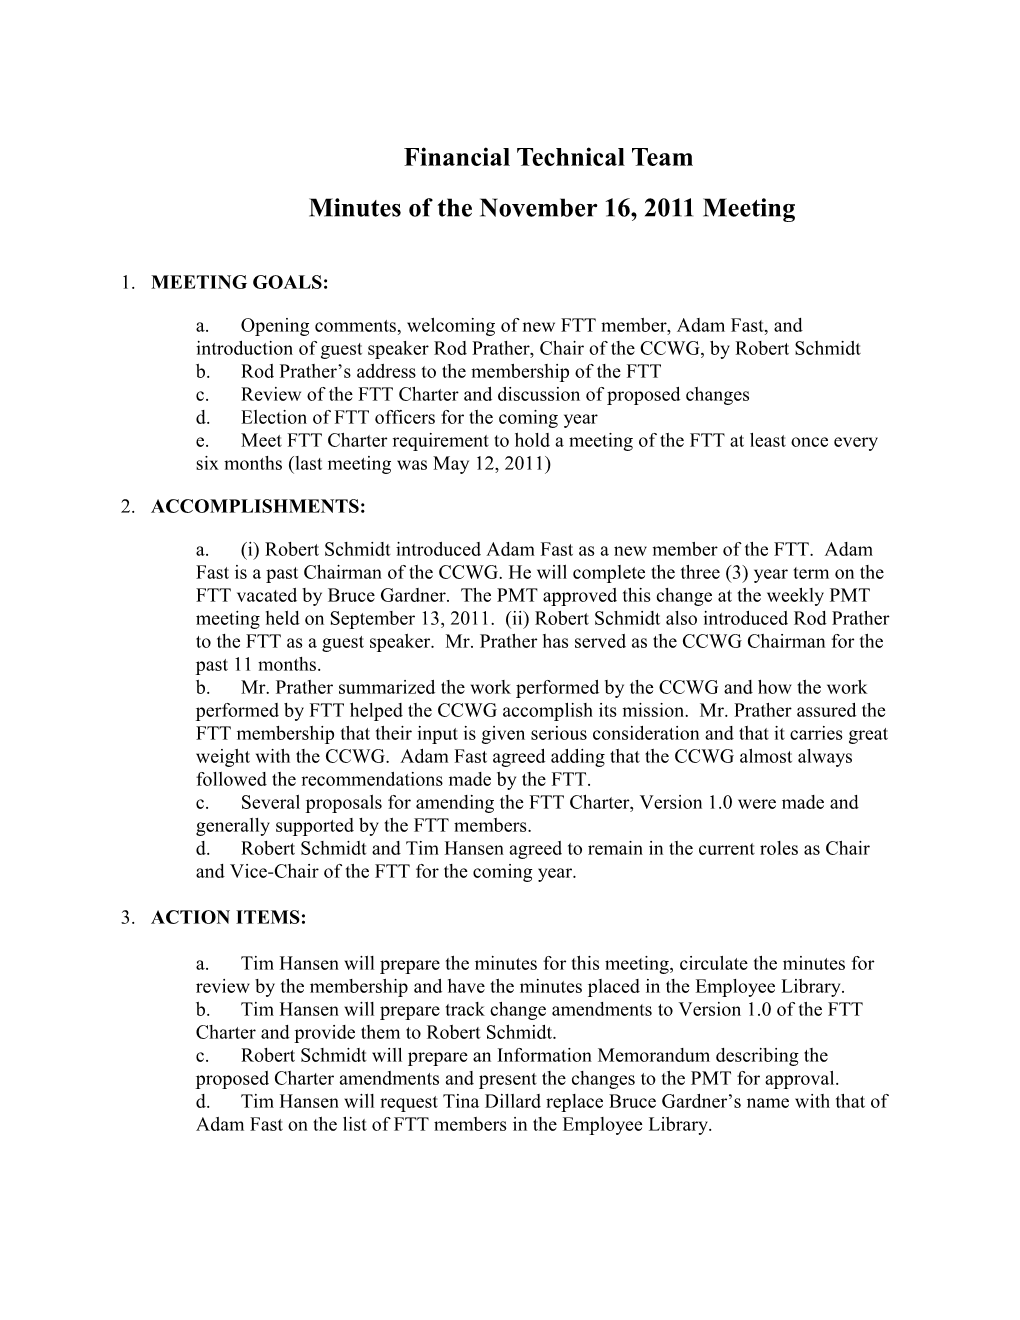 Minutes of the November 16, 2011 Meeting